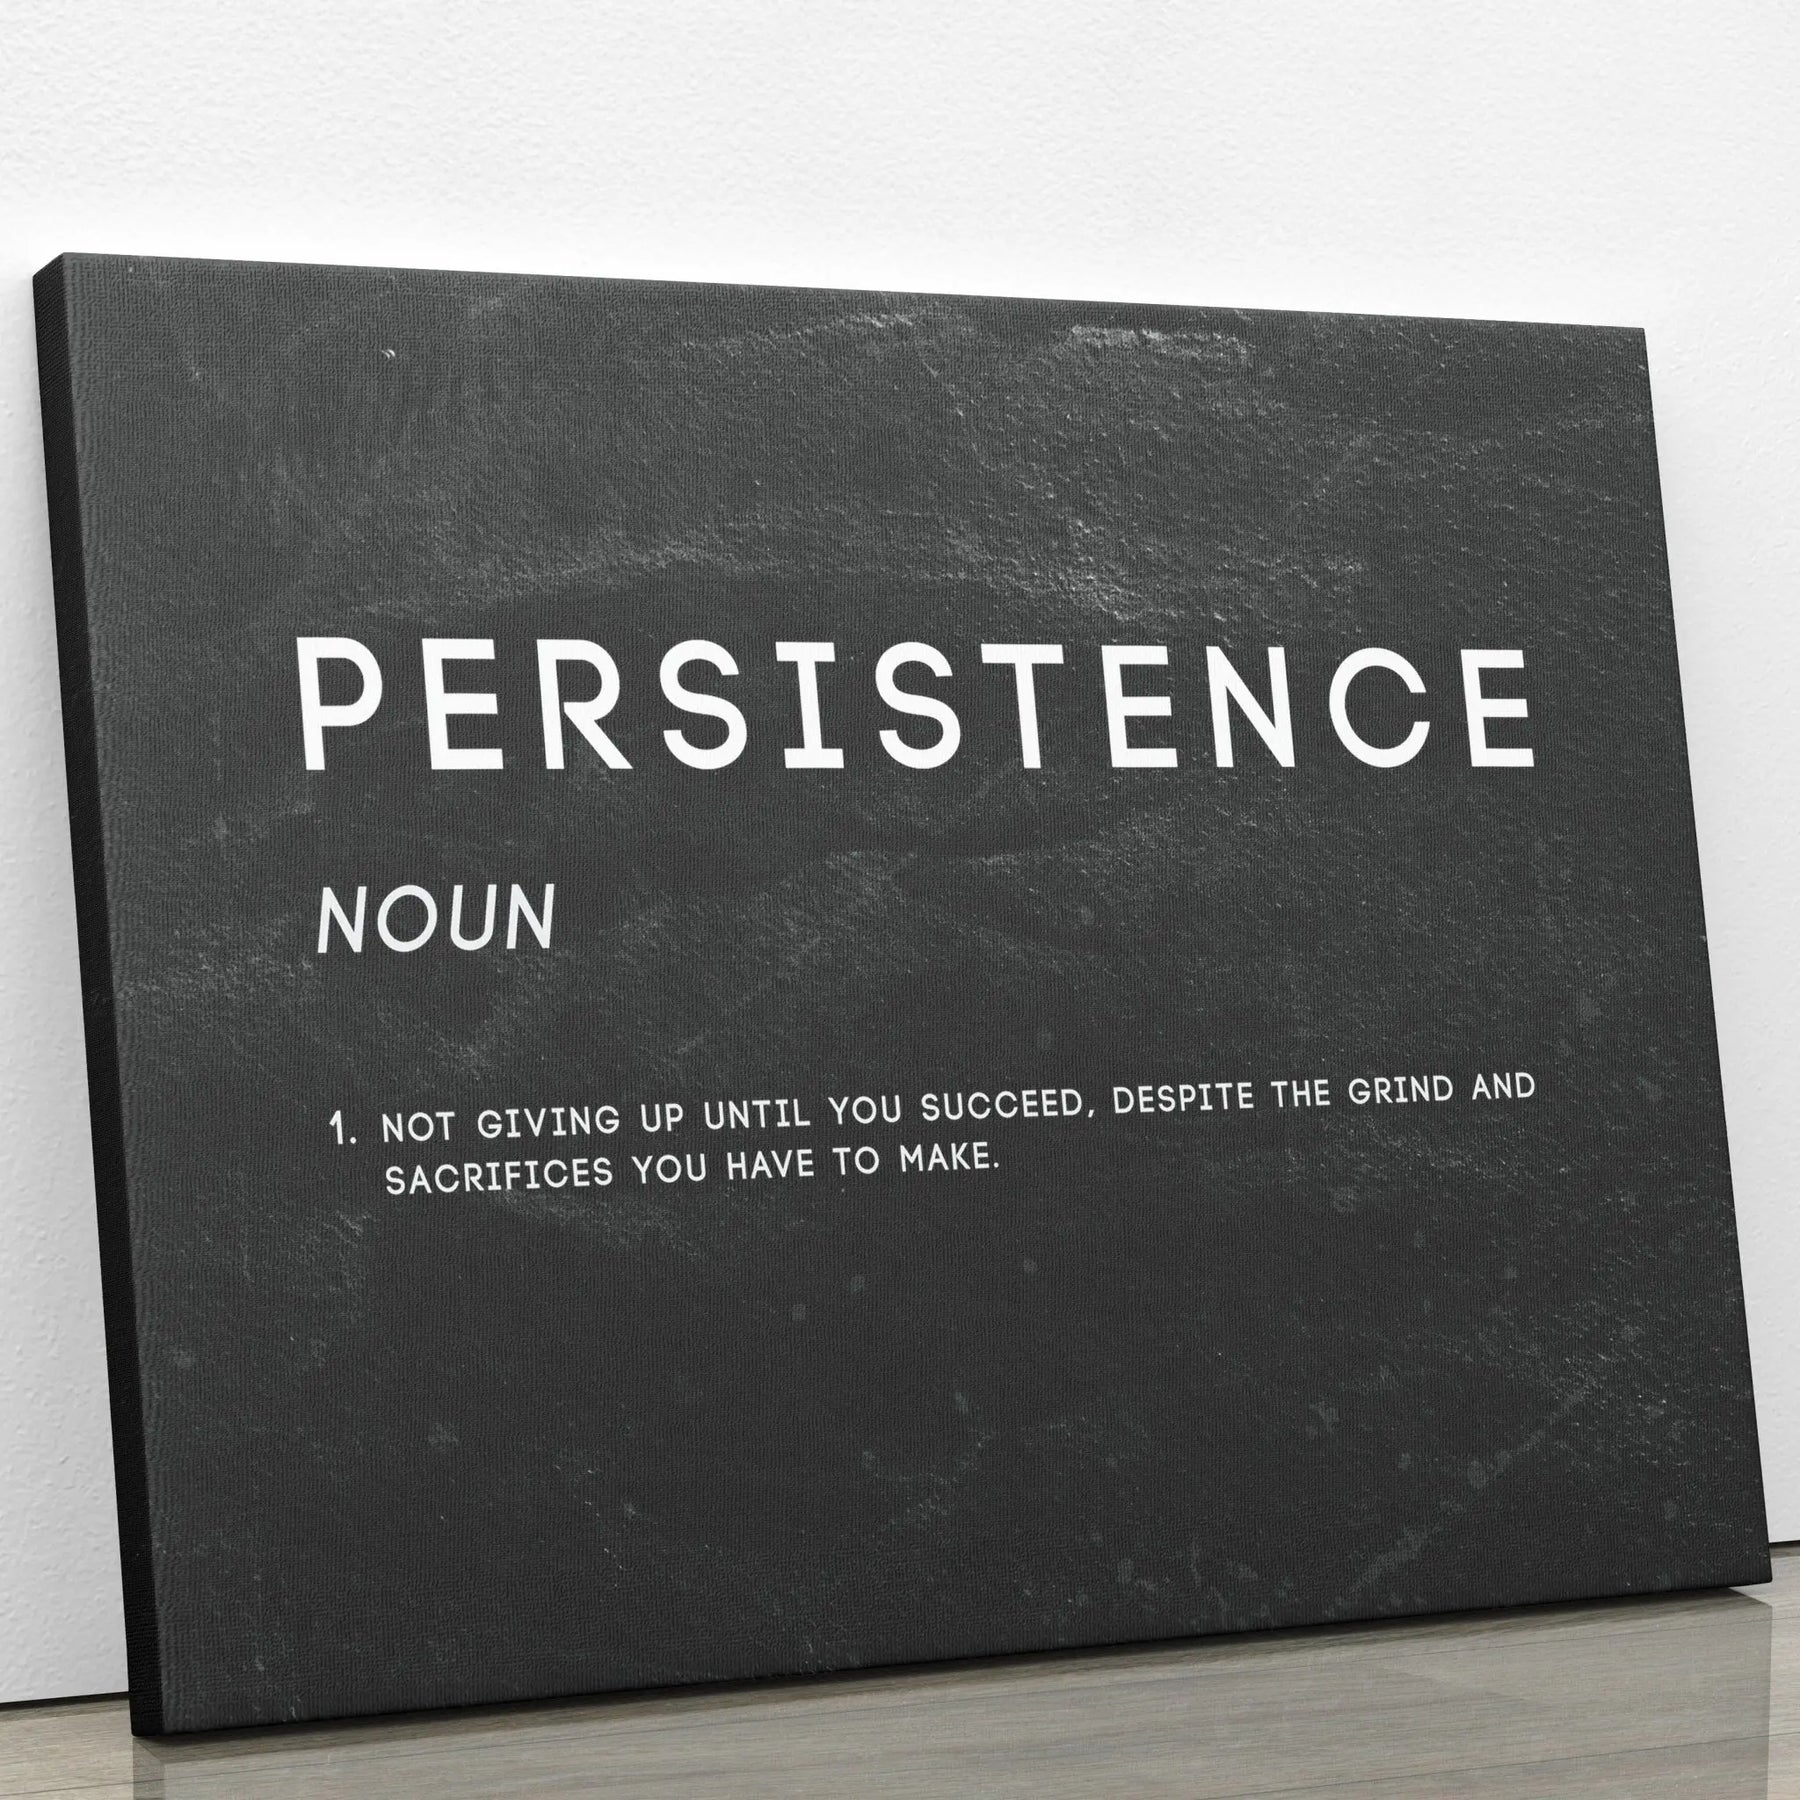 "PERSISTENCE" - Art For Everyone